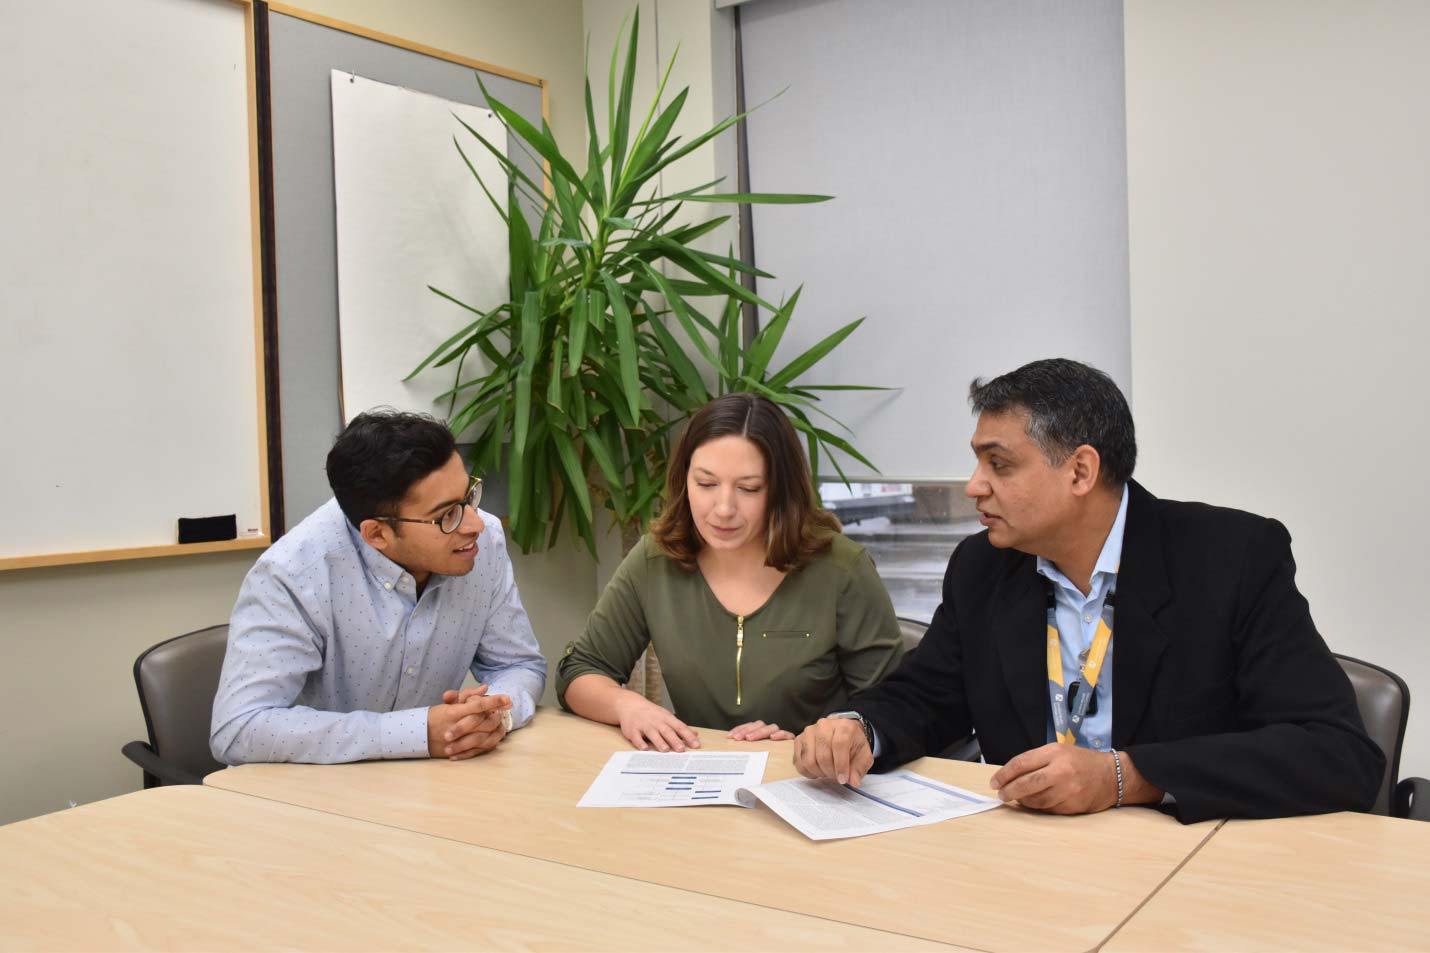 Jayneel Limbachia, Emily Ionson and Dr. Akysha Vasudev sitting together at a table and looking at papers.